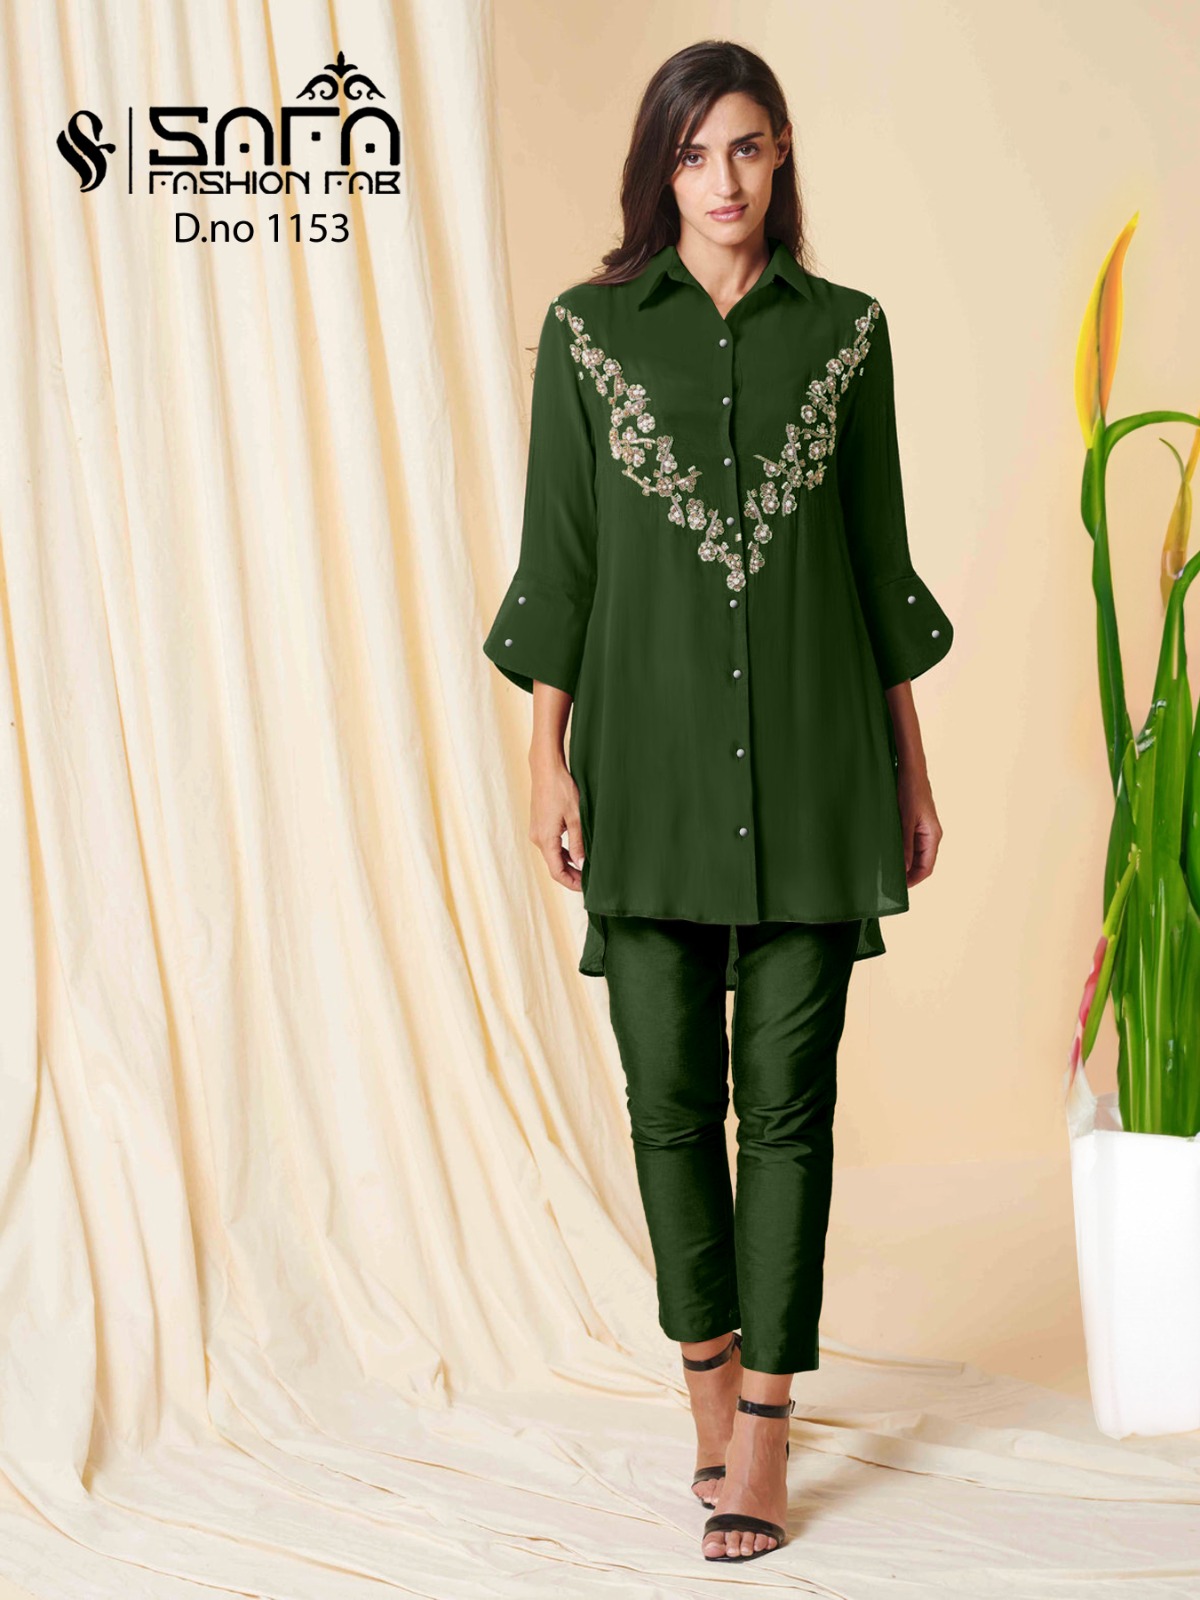 Top Clothing Brands In Pakistan 2020 [Updated] - StyleGlow.com | Beautiful  pakistani dresses, Sleeves designs for dresses, Stylish dresses for girls